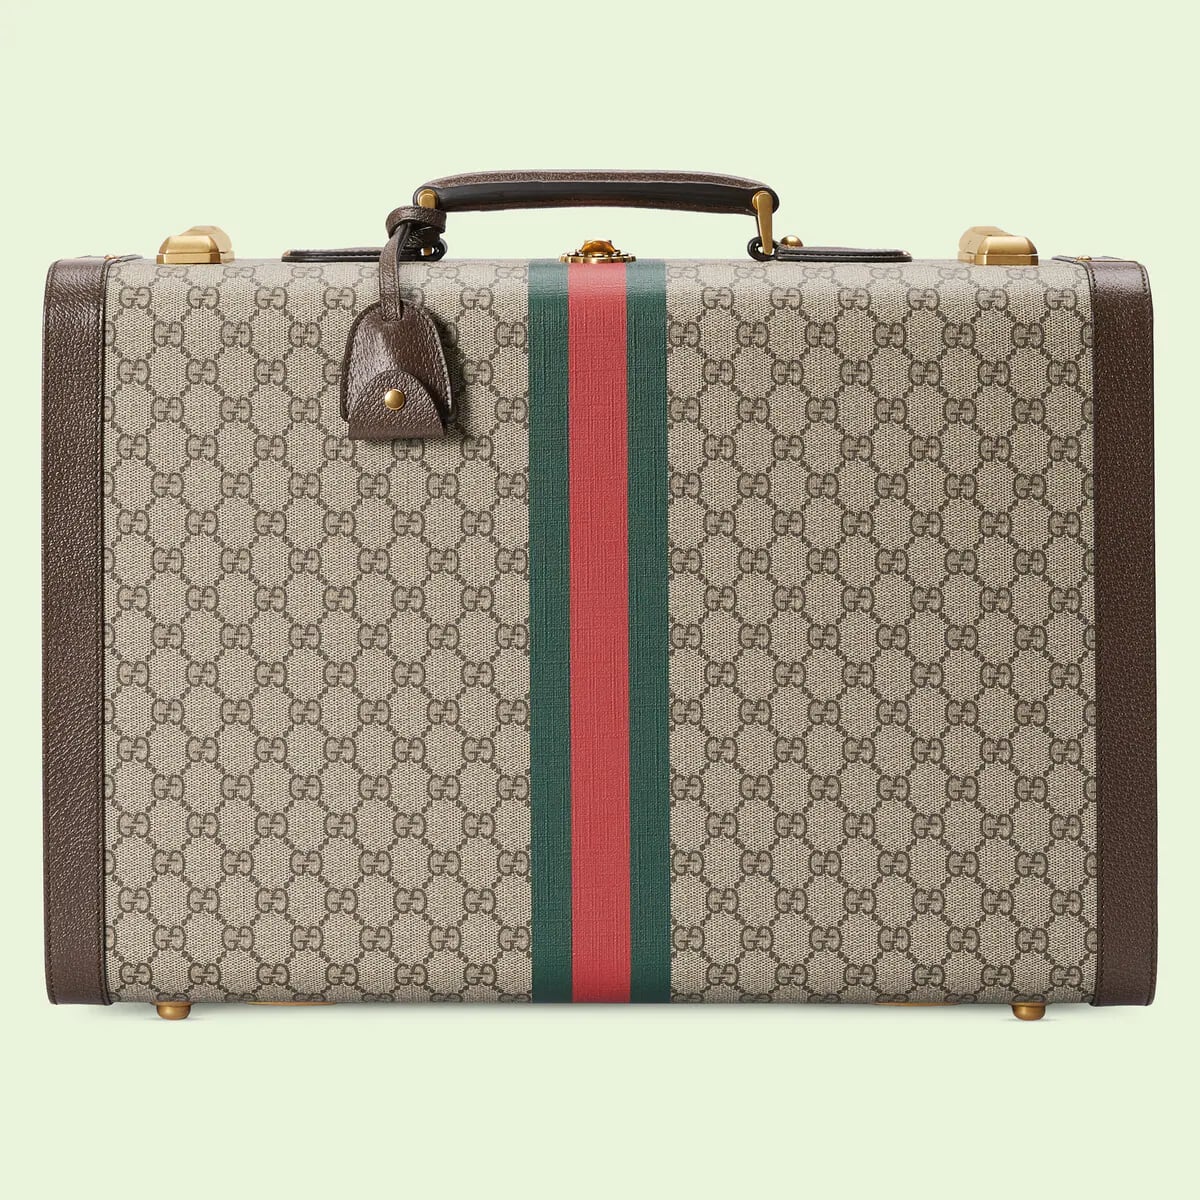 Work Bags For Men: Gucci Savoy Medium Case With Web | 11 Practical and  Stylish Men's Work Bags | POPSUGAR Fashion Photo 17